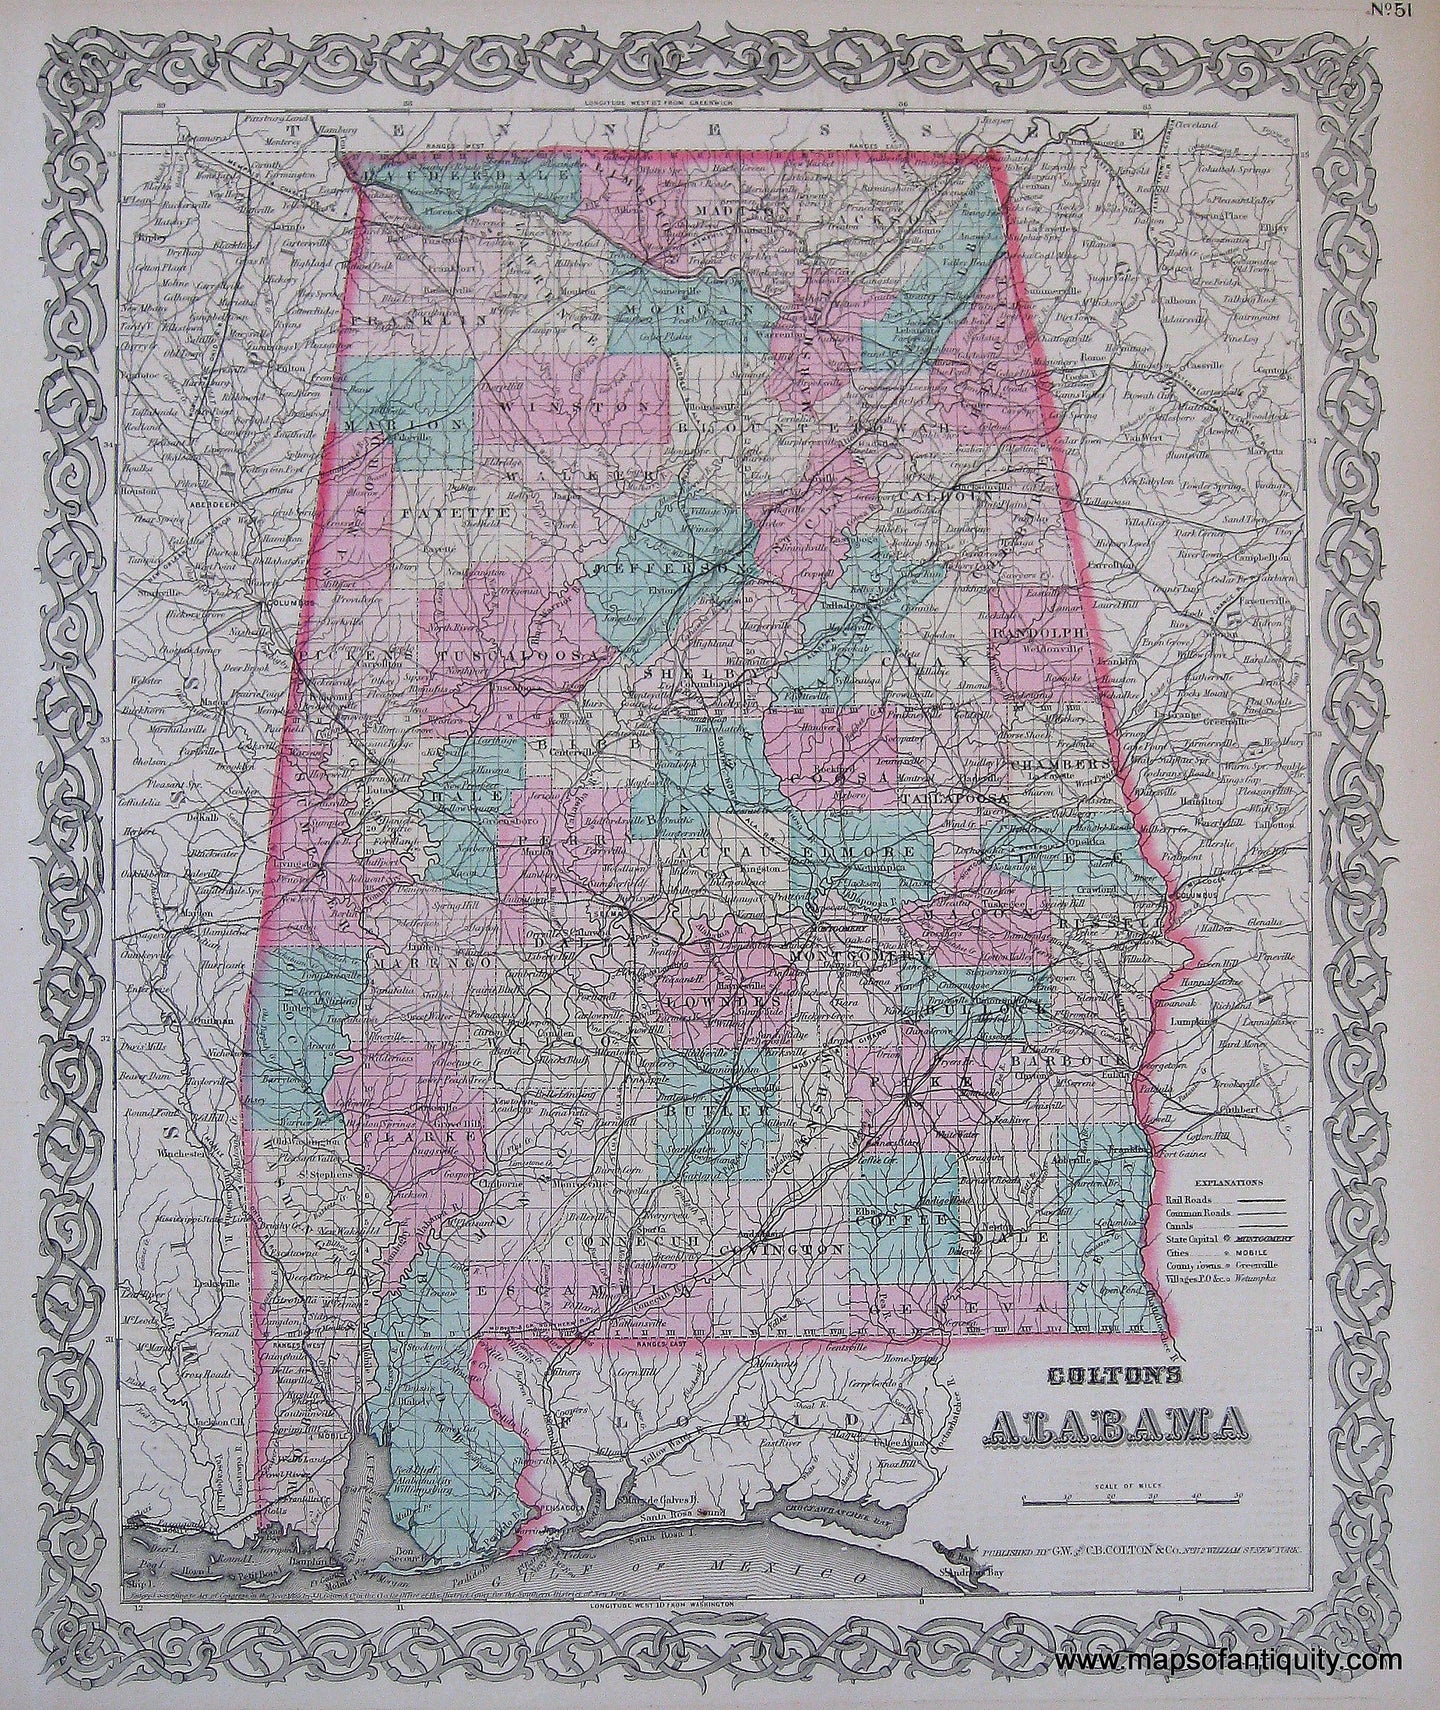 Antique-Hand-Colored-Map-Coltons-Alabama-1871-Colton-Maps-Of-Antiquity